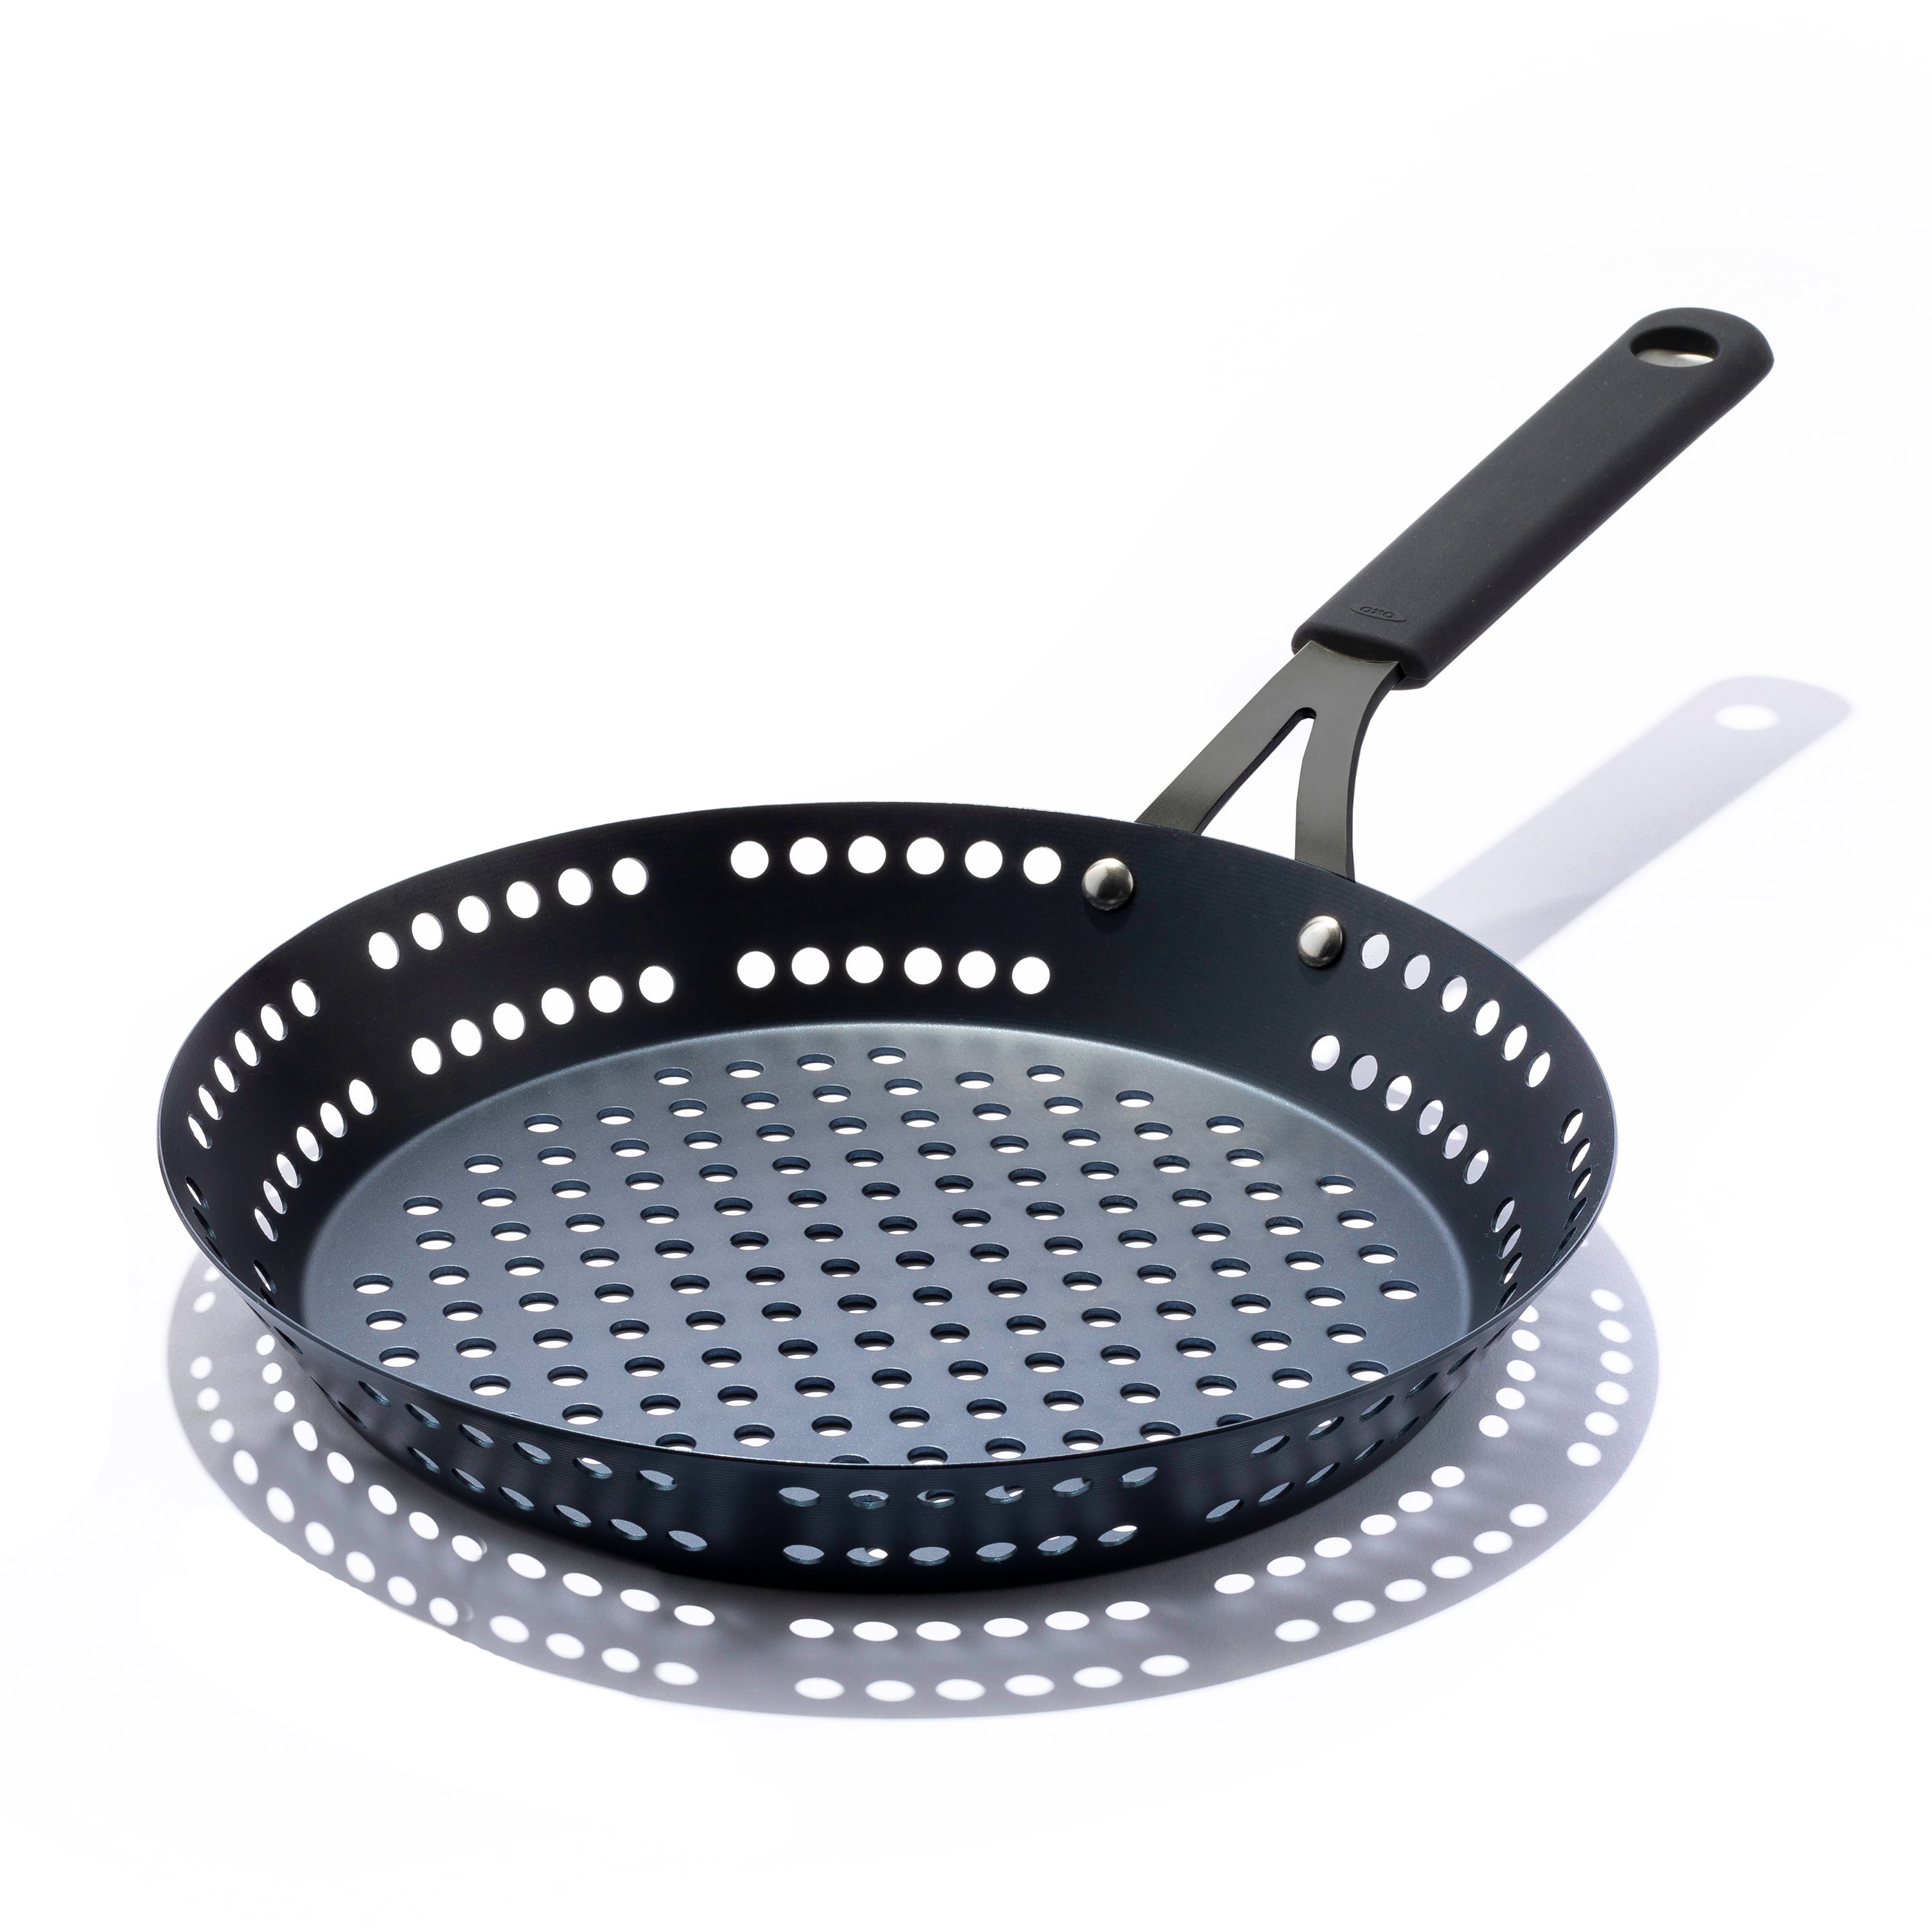 OXO Obsidian Carbon Steel 12 BBQ Fry Pan with Silicone Sleeve Black